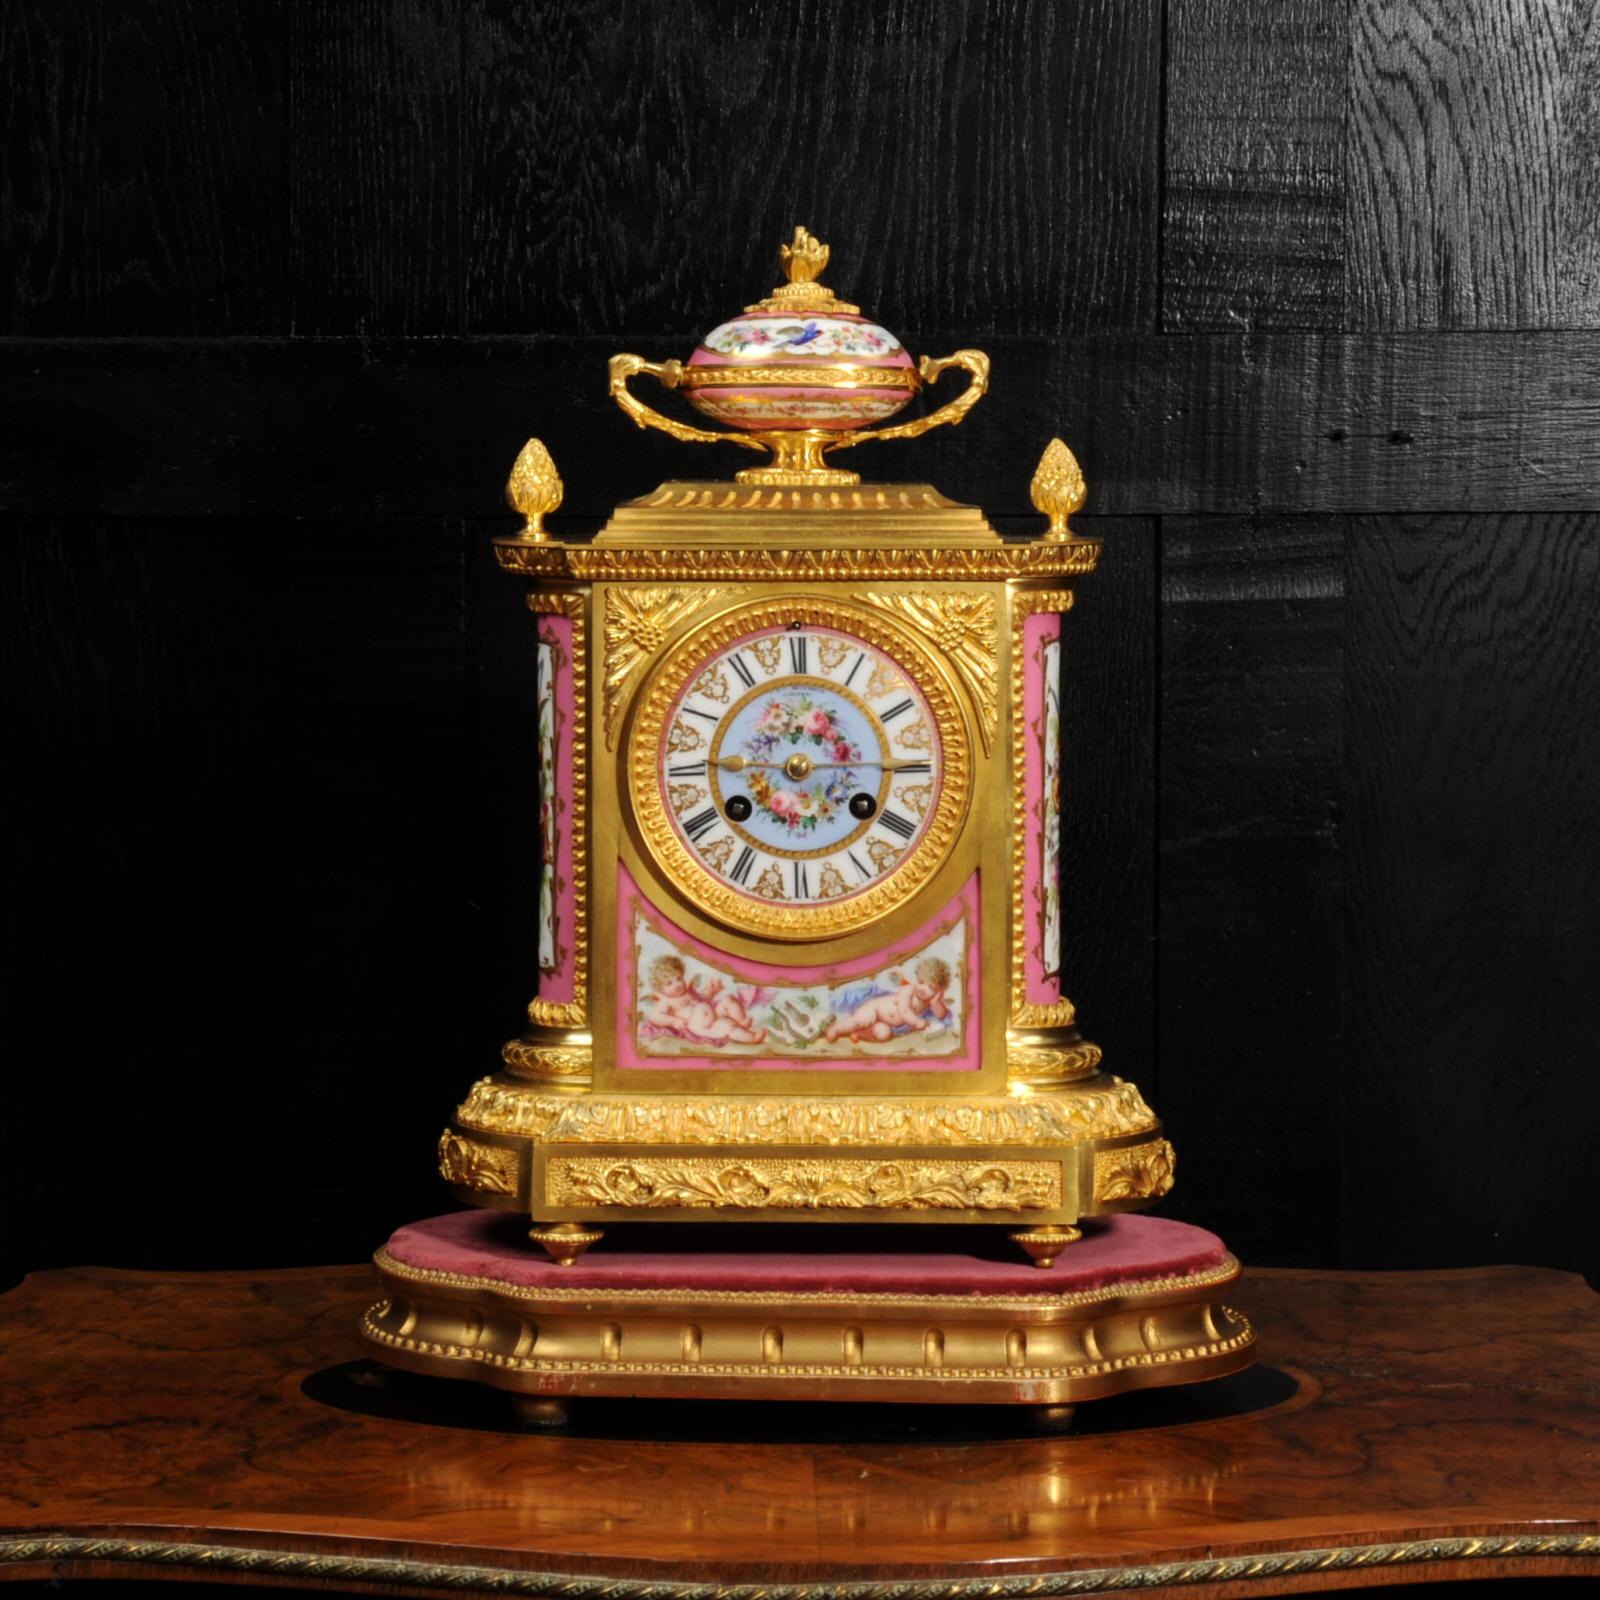 A fine ormolu (mercury fire gilded bronze doré) clock mounted with exquisite Sèvres style porcelain with Rose Pompadour pink ground. Made by the renown Parisan maker Jean-Baptiste Delettrez and retailed by Glasgow jeweller J&W Mitchell. Classical in